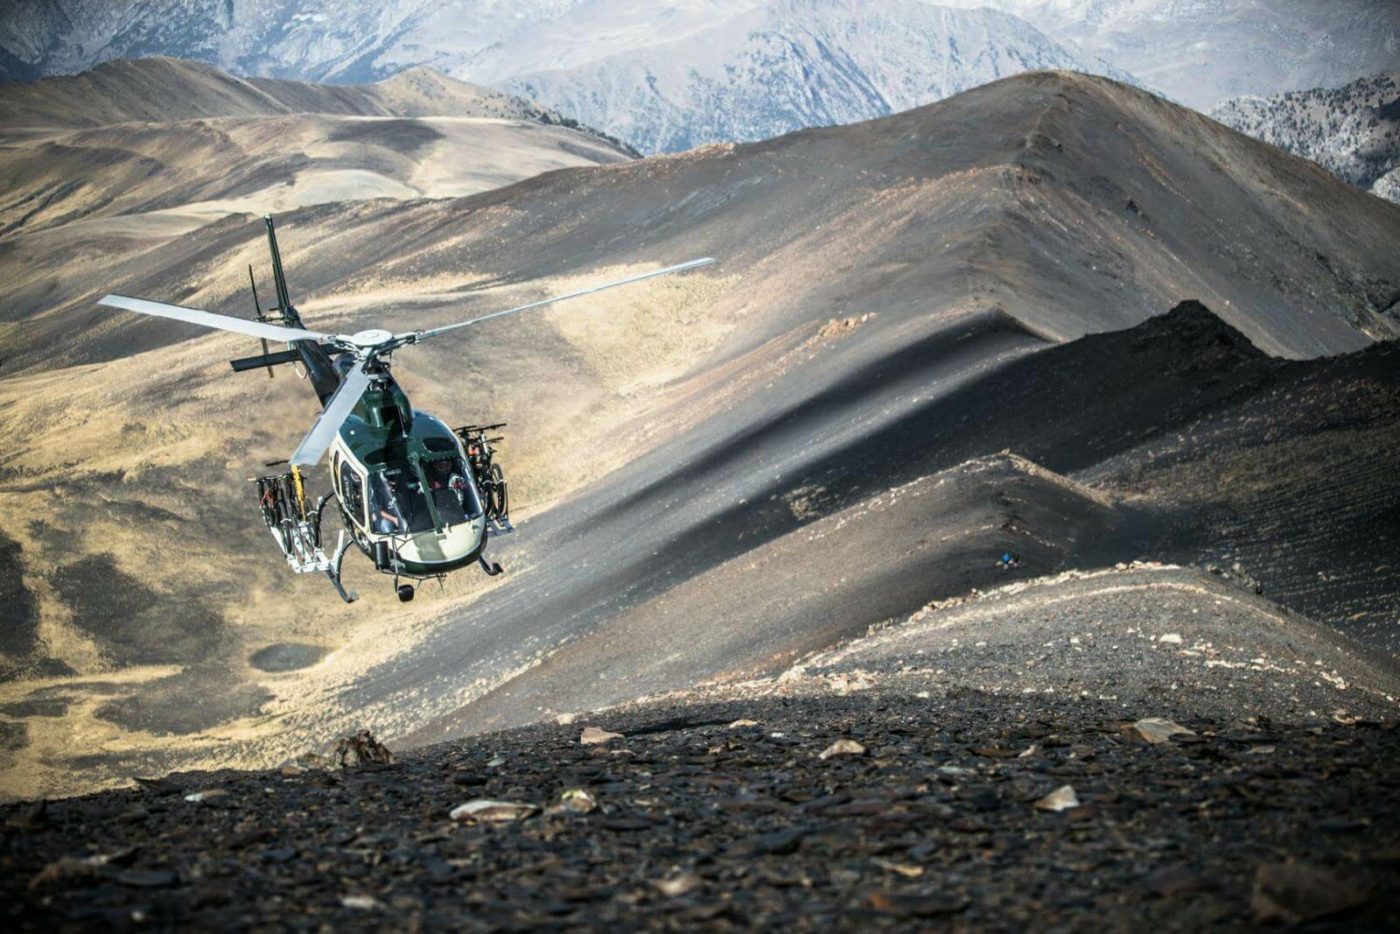 Helicopter carrying mountain bikes coming in to land over mountainous, brown landscape